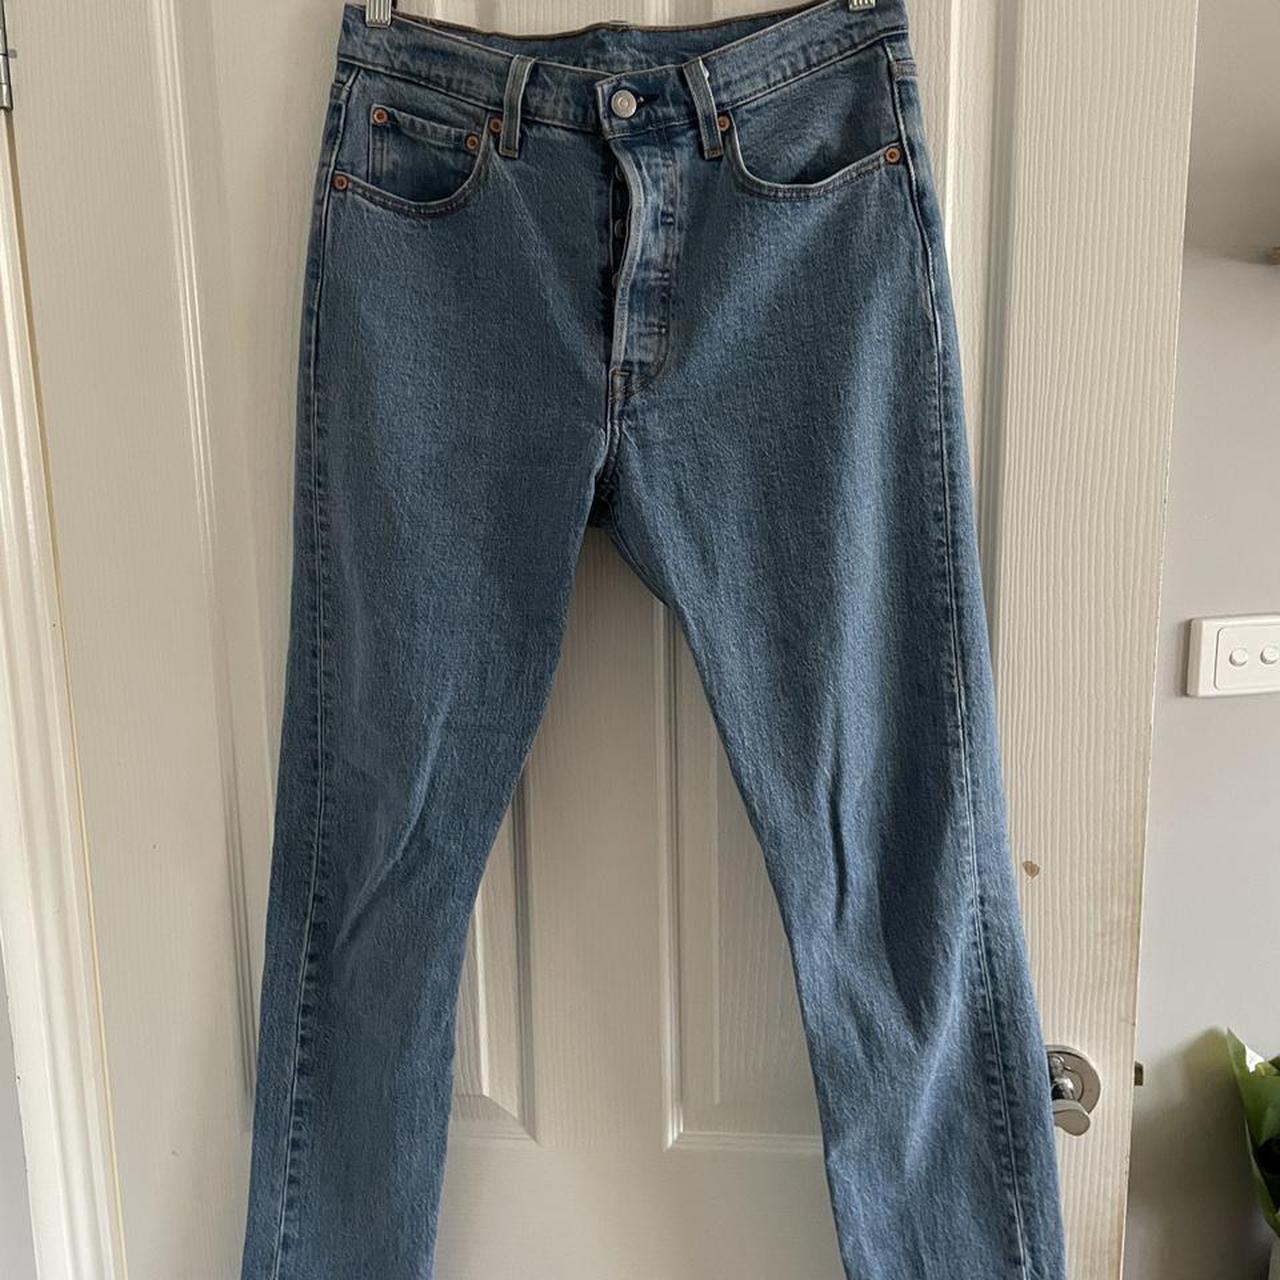 Selling these super cute Levi’s Jeans!! They are... - Depop